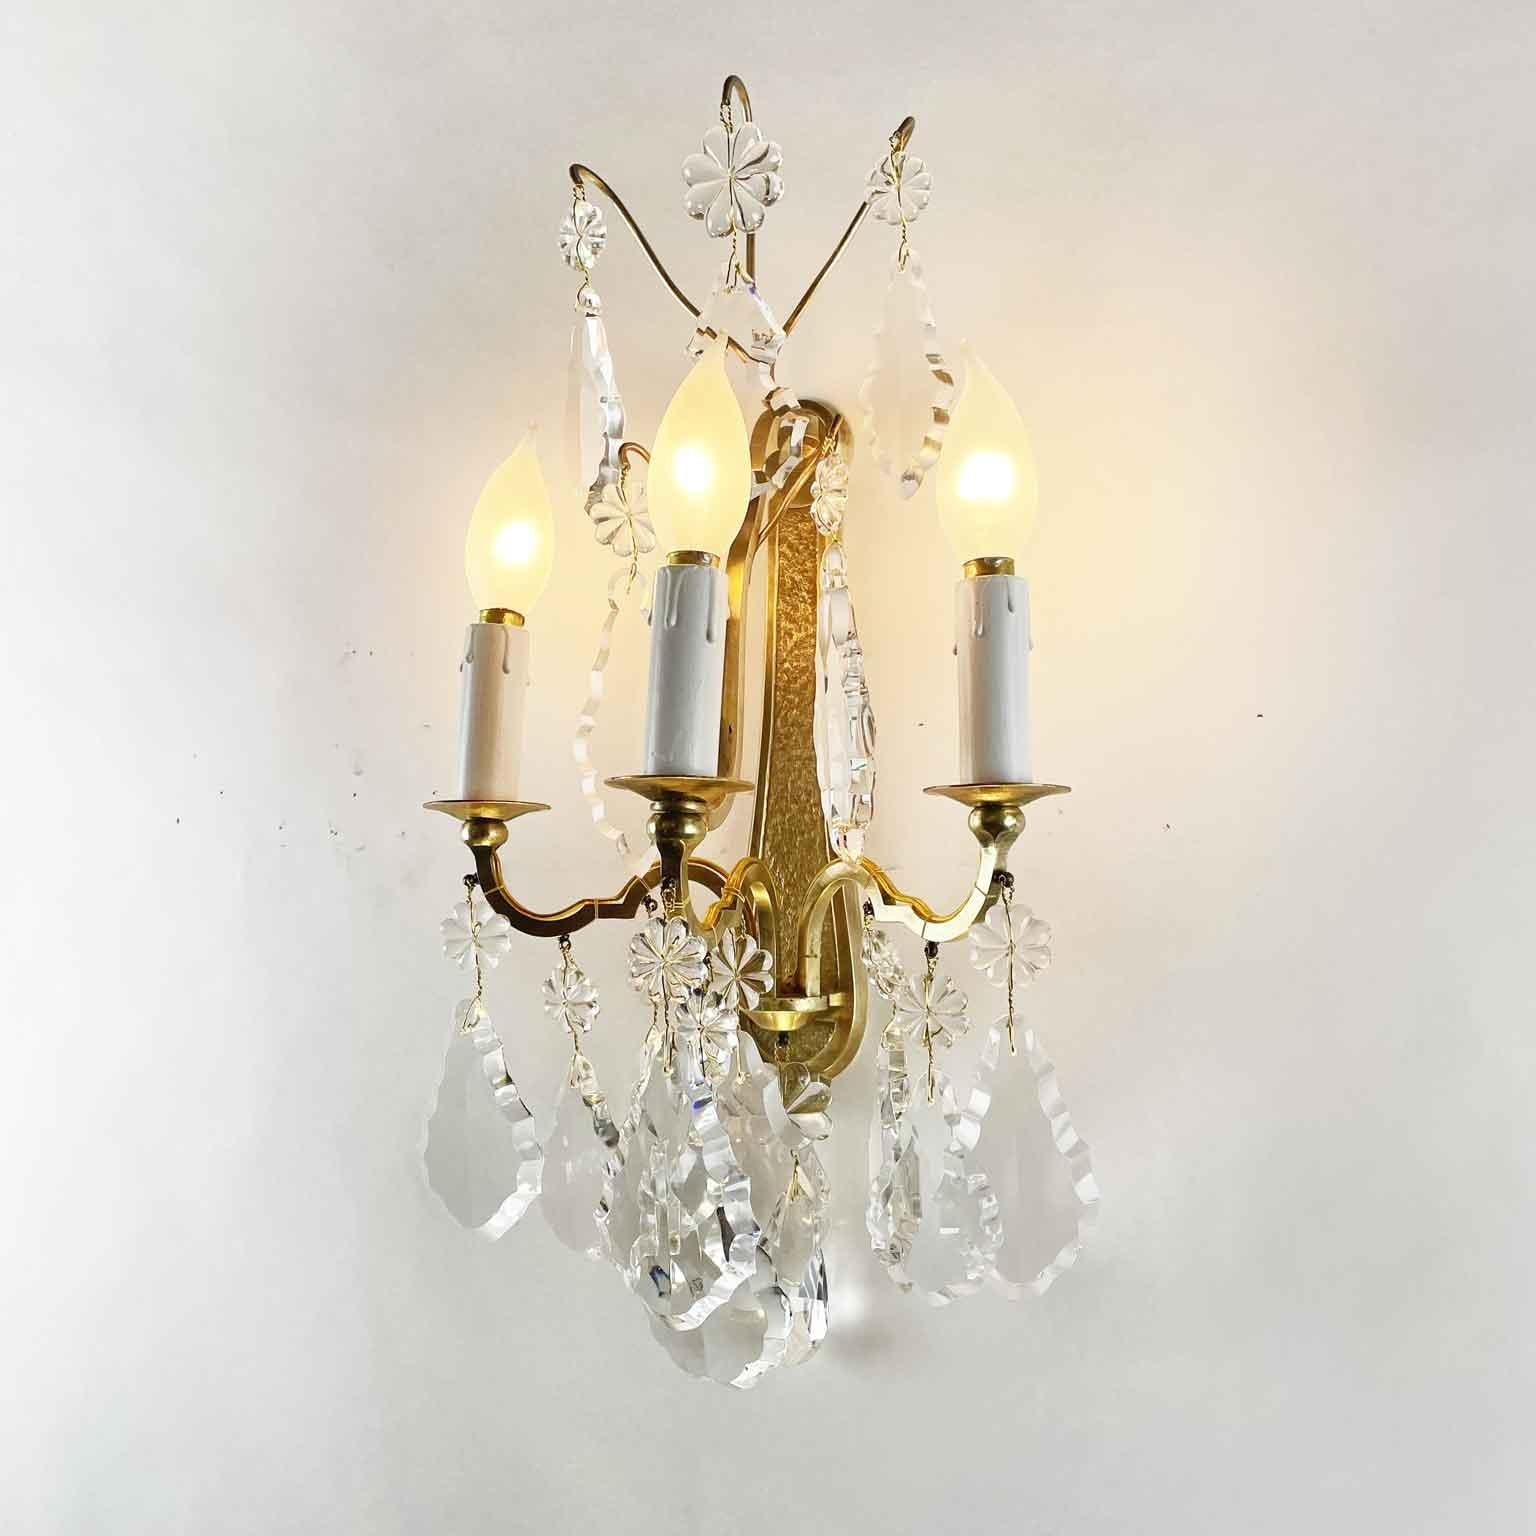 Set of Four Baccarat Crystal Sconces 20th Century French Gilt Wall Lights 3